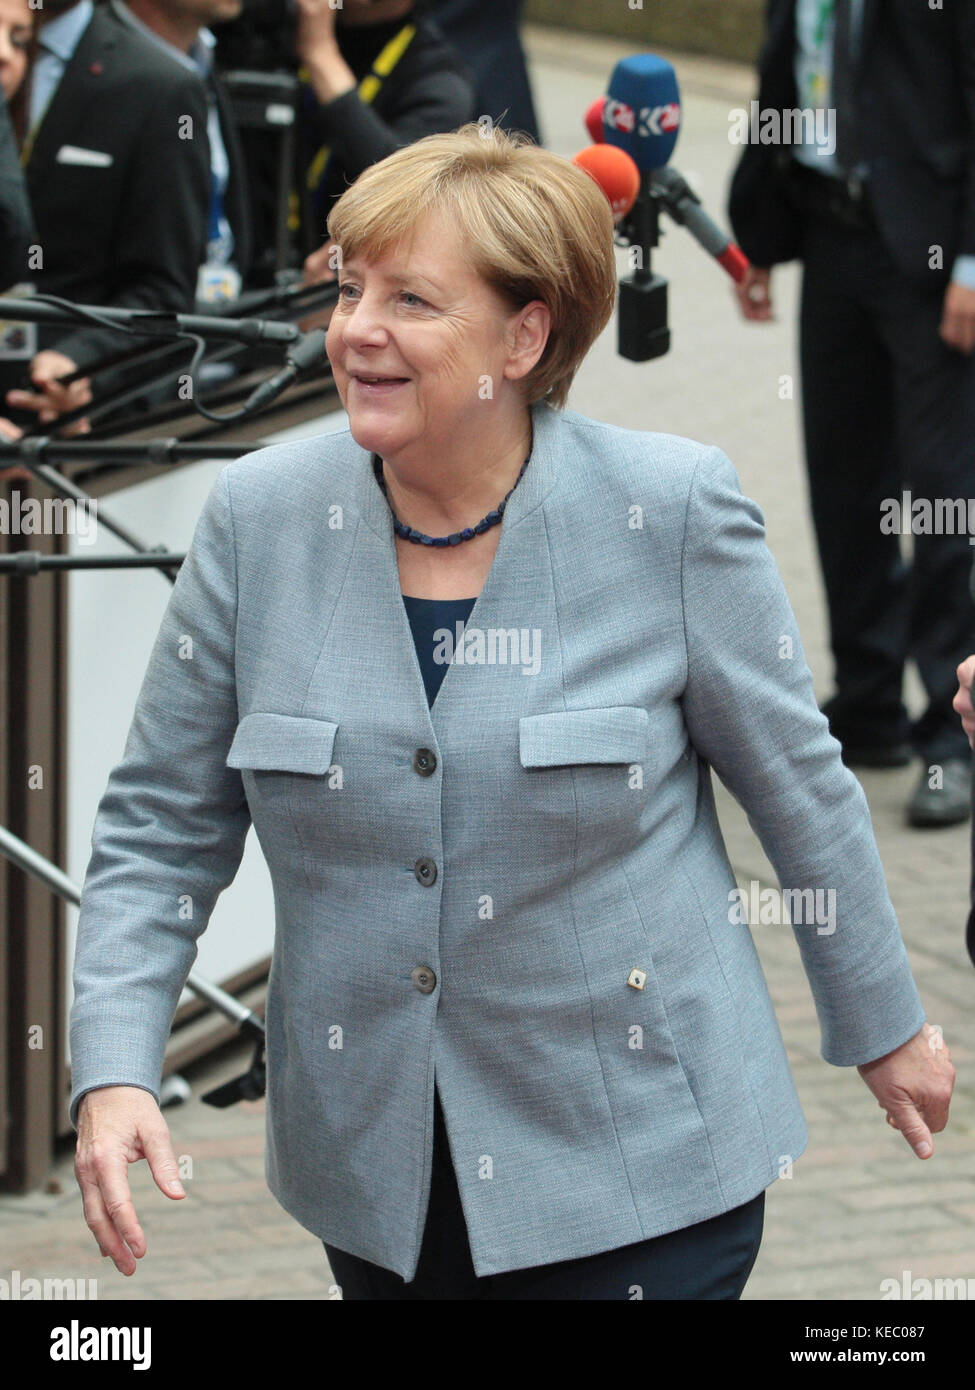 Brussels, Belgium. 19th Oct, 2017. Angela MERKEL, Federal Chancellor of Germany, at the European Council, Credit: Leo Cavallo/Alamy Live News Stock Photo